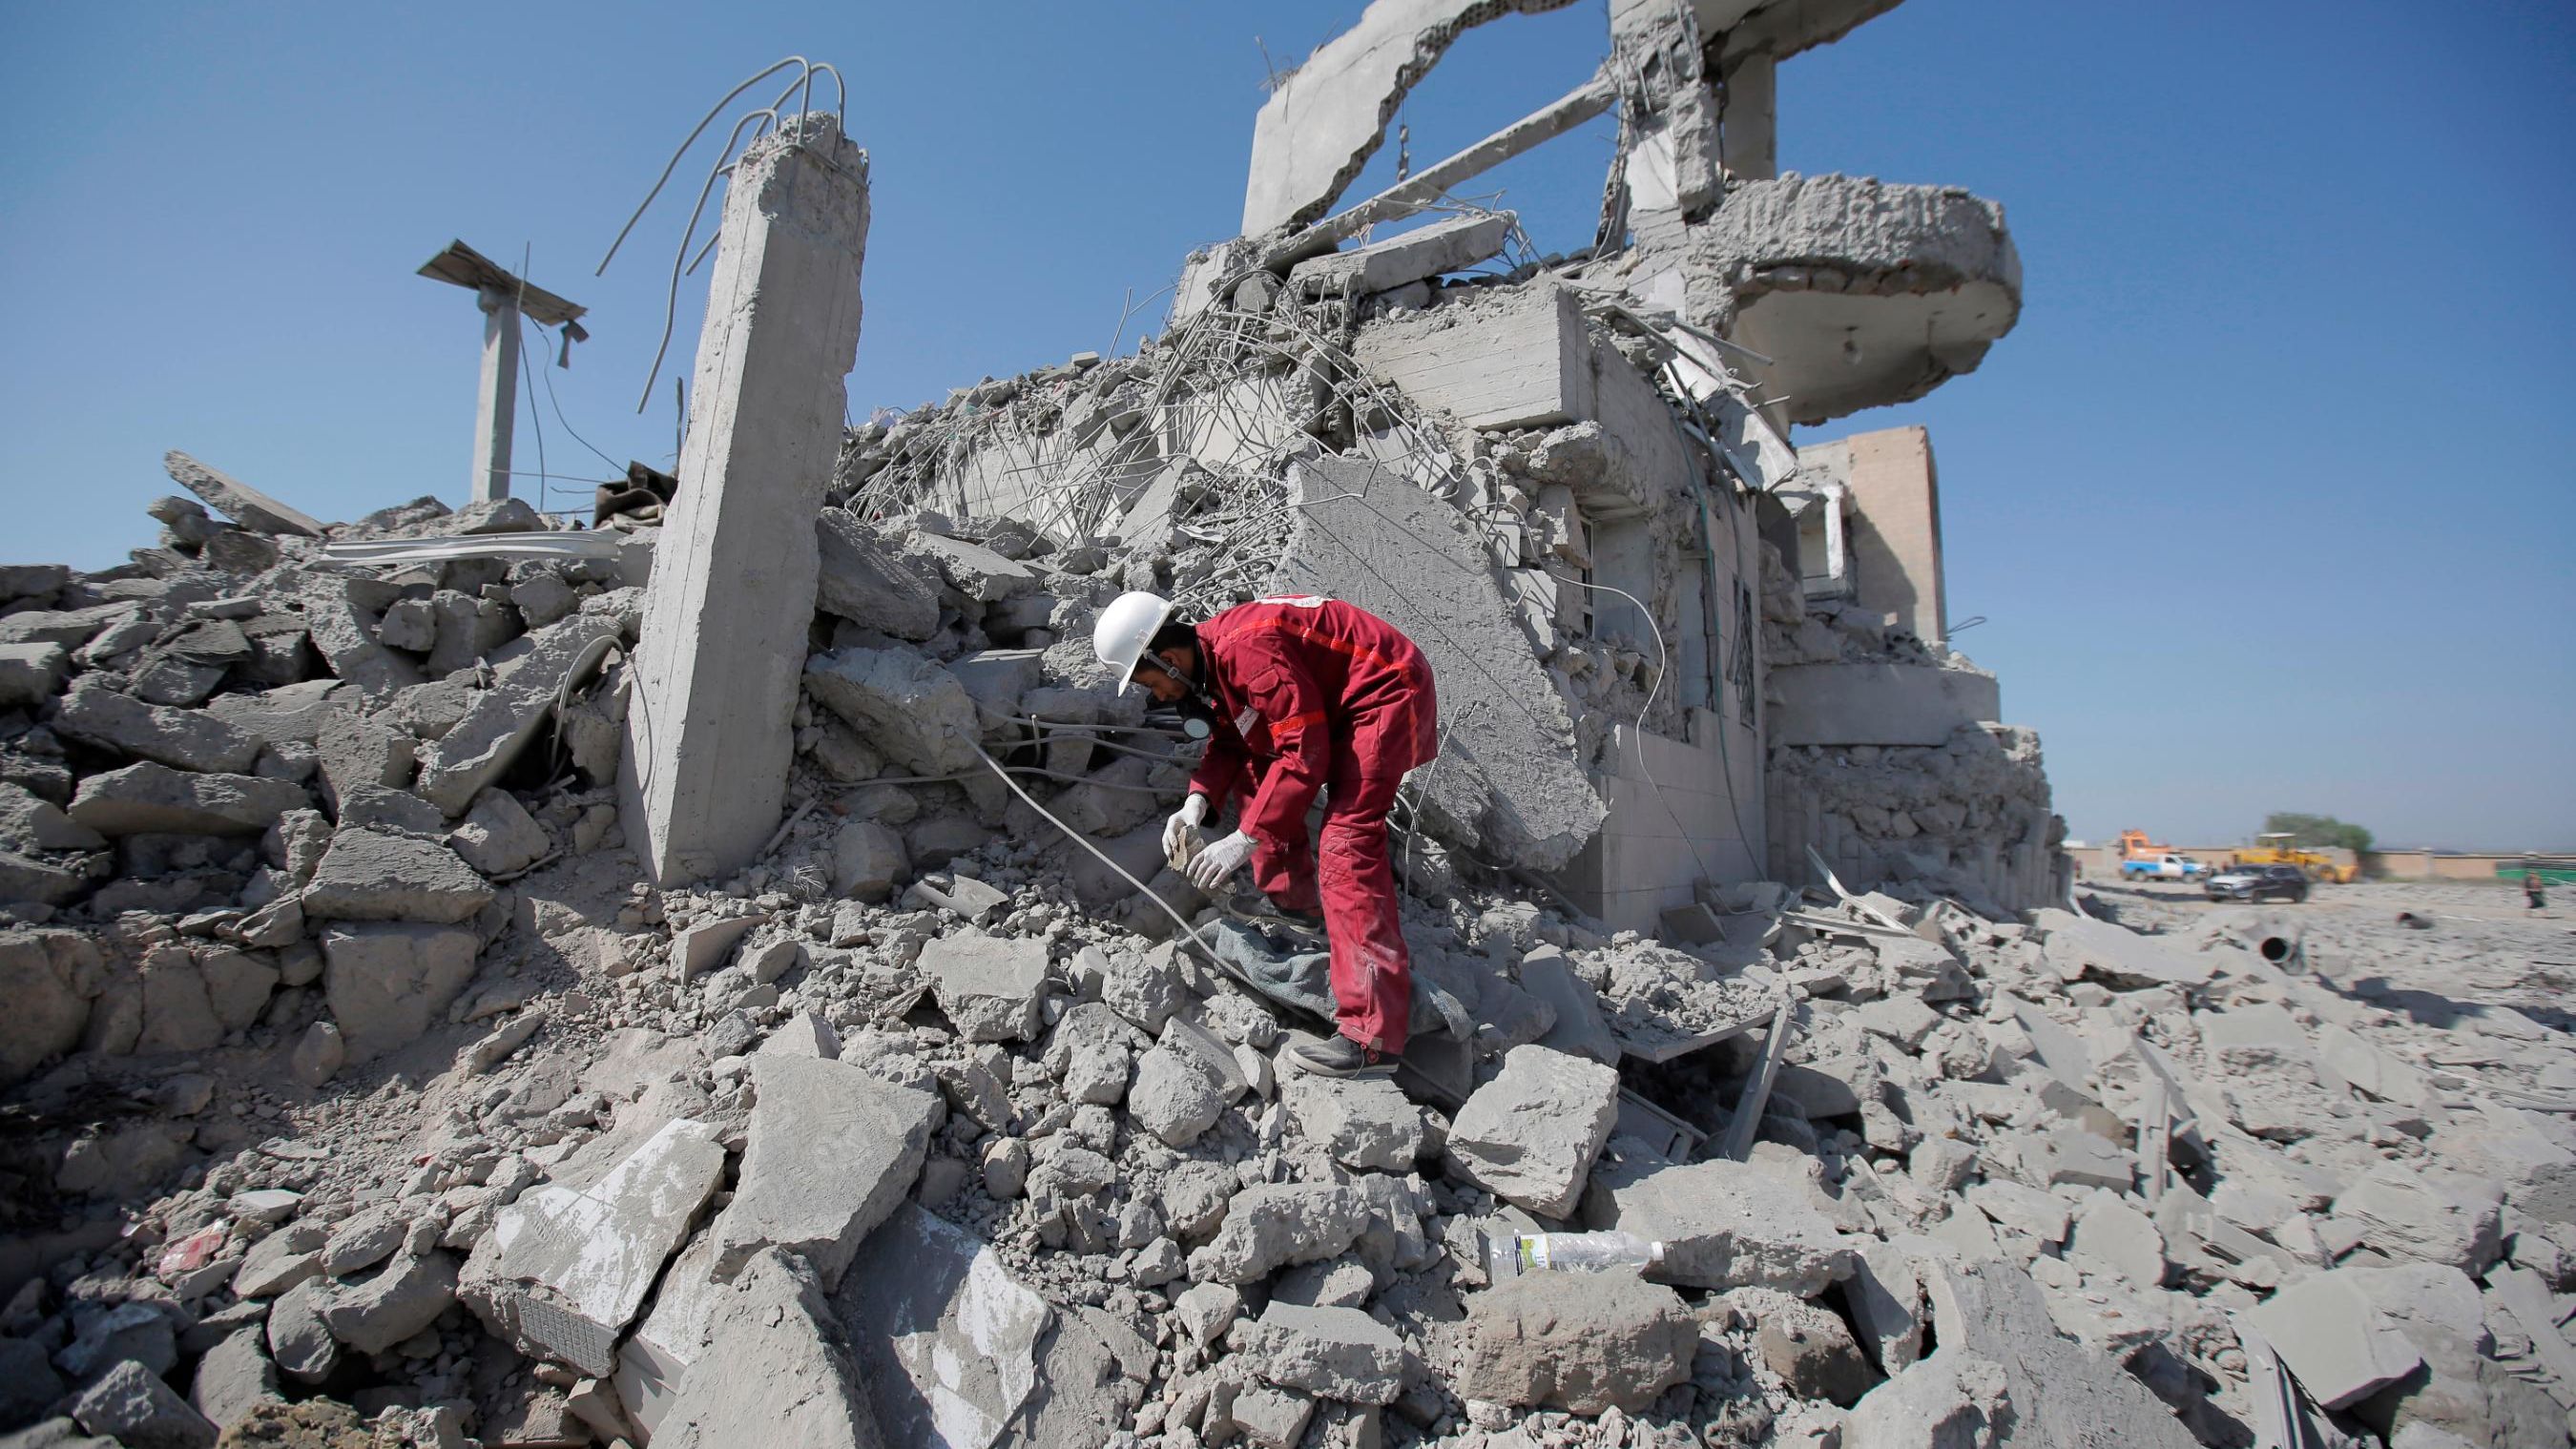 A rescue worker recovers a body from under the rubble of the detention center following the strikes.